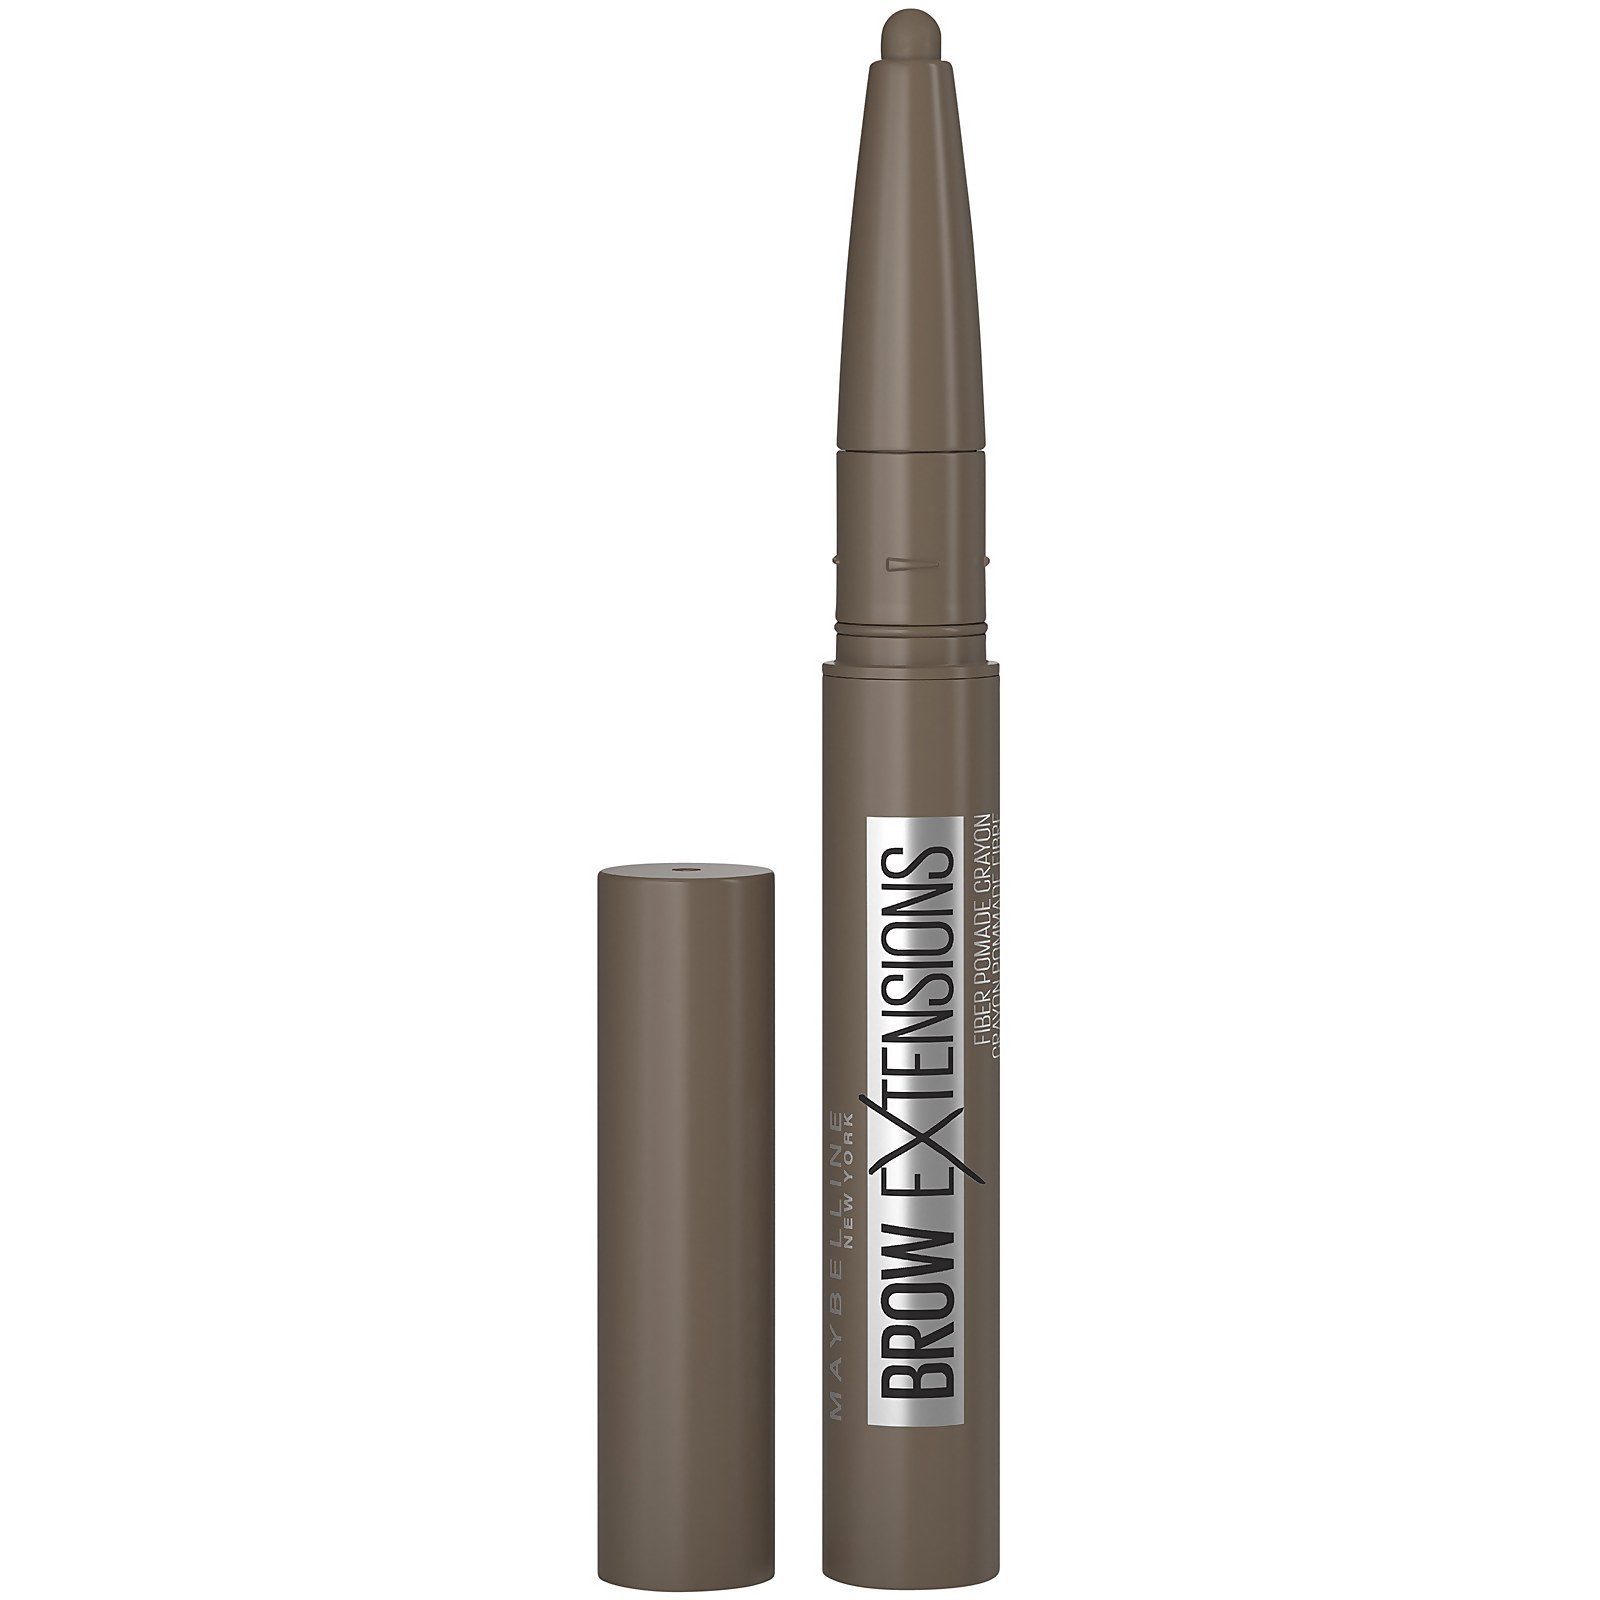 maybelline brow extensions eyebrow pomade crayon 21ml (various shades) - medium brown